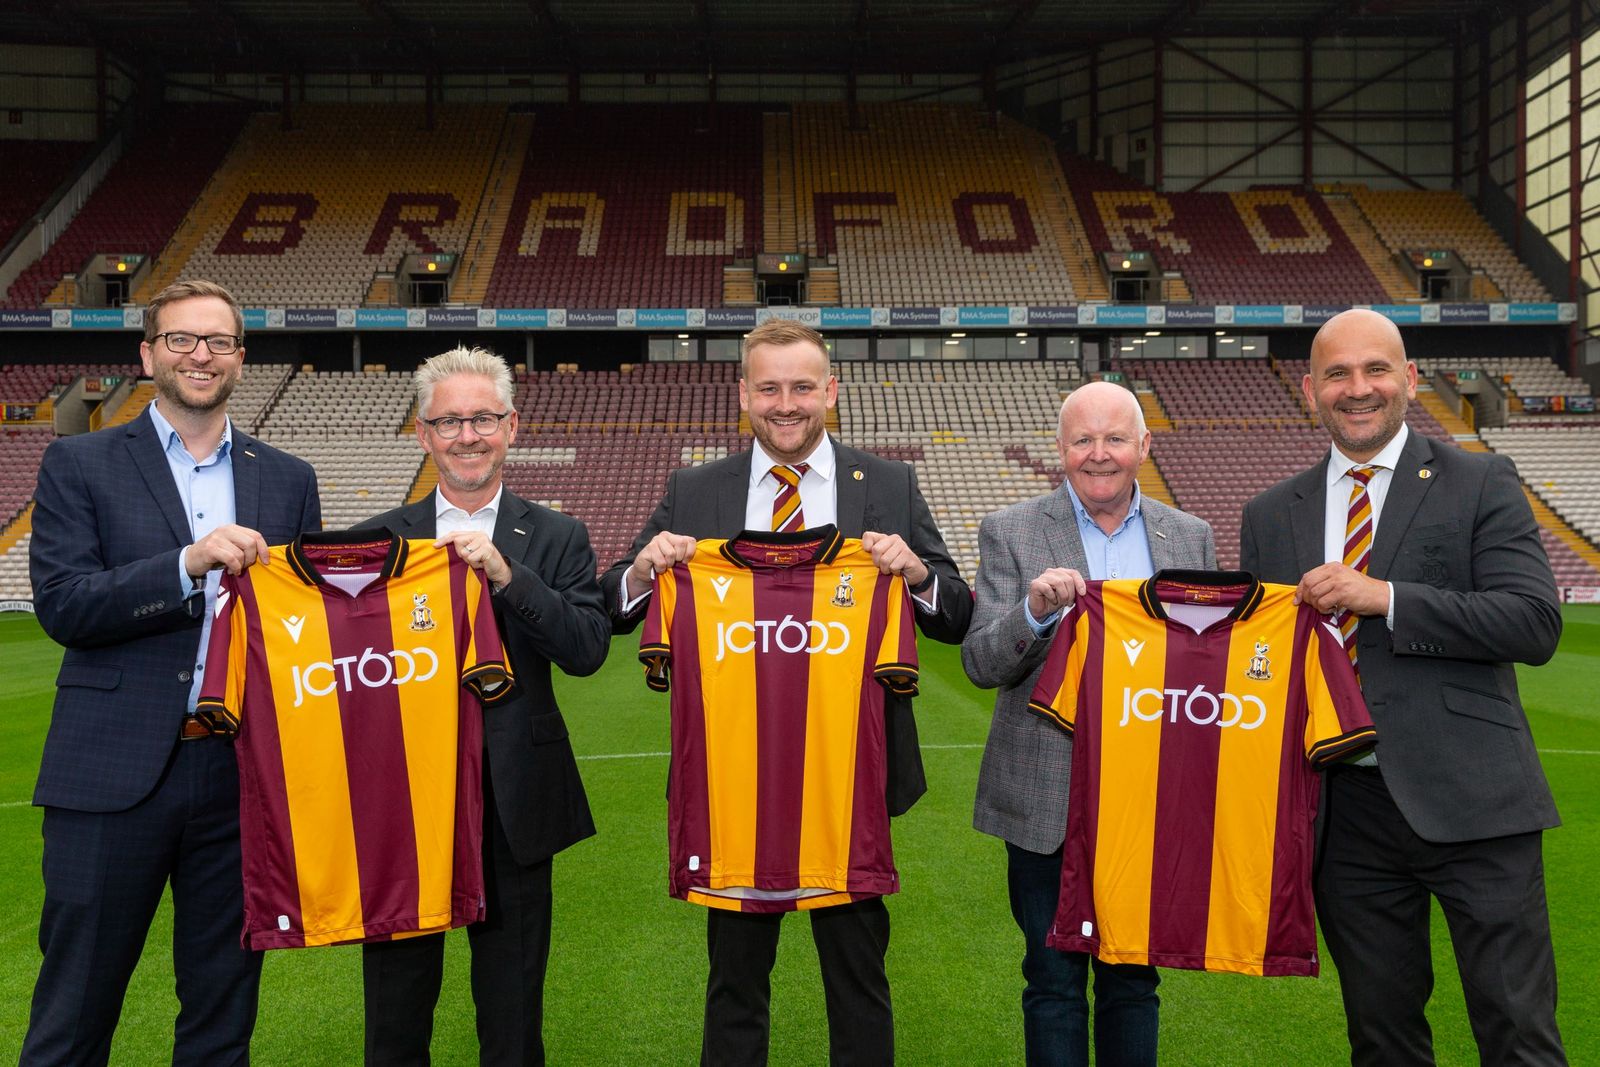 JCT600 to continue as ‘driving force’ at Bradford City